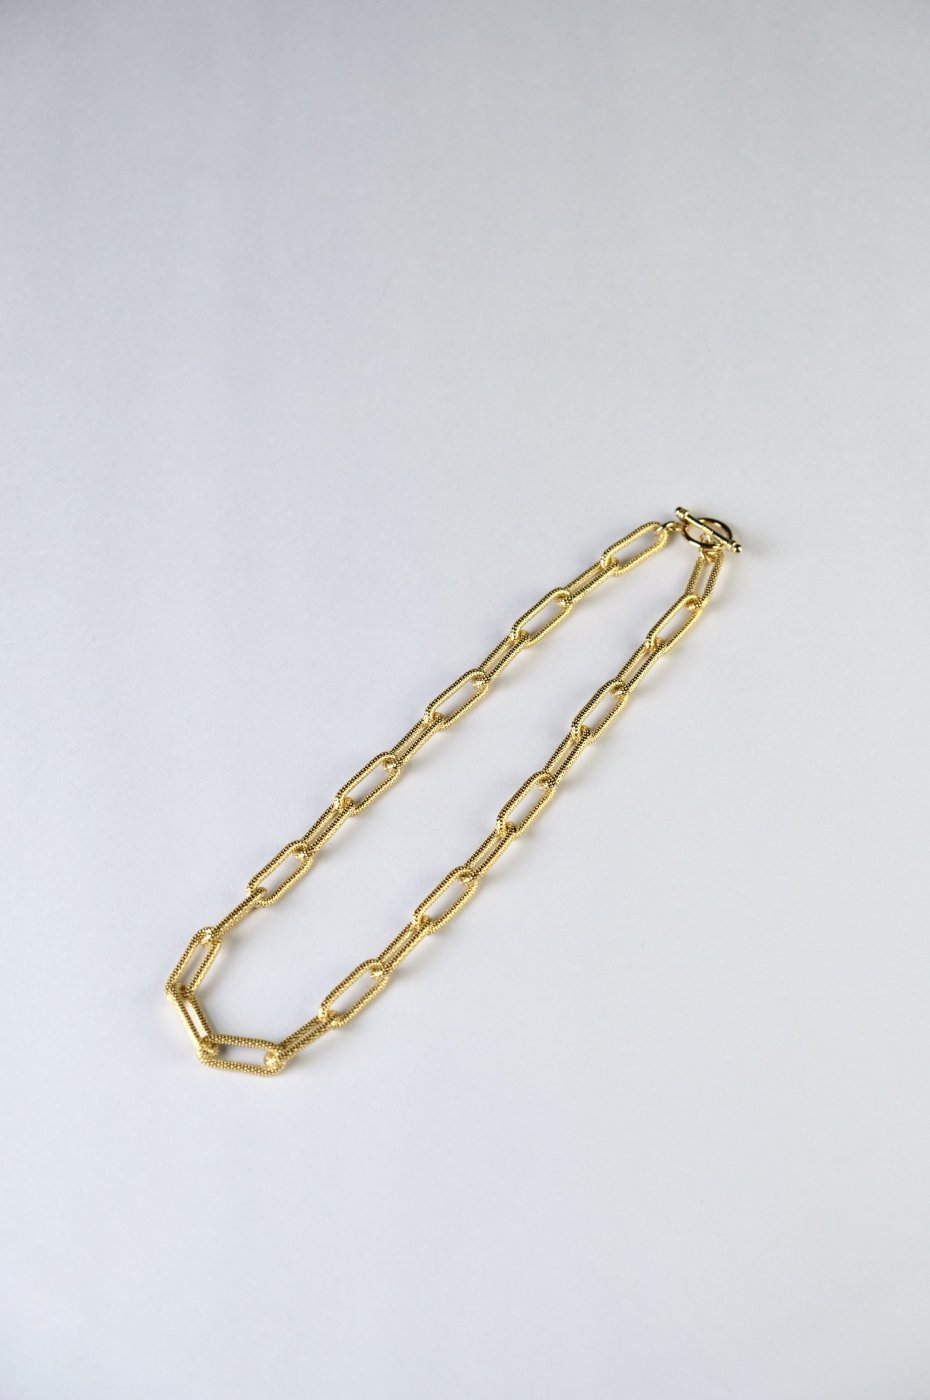 R.ALAGAN 饬-HEAVY CHAIN NECKLACE-GOLD